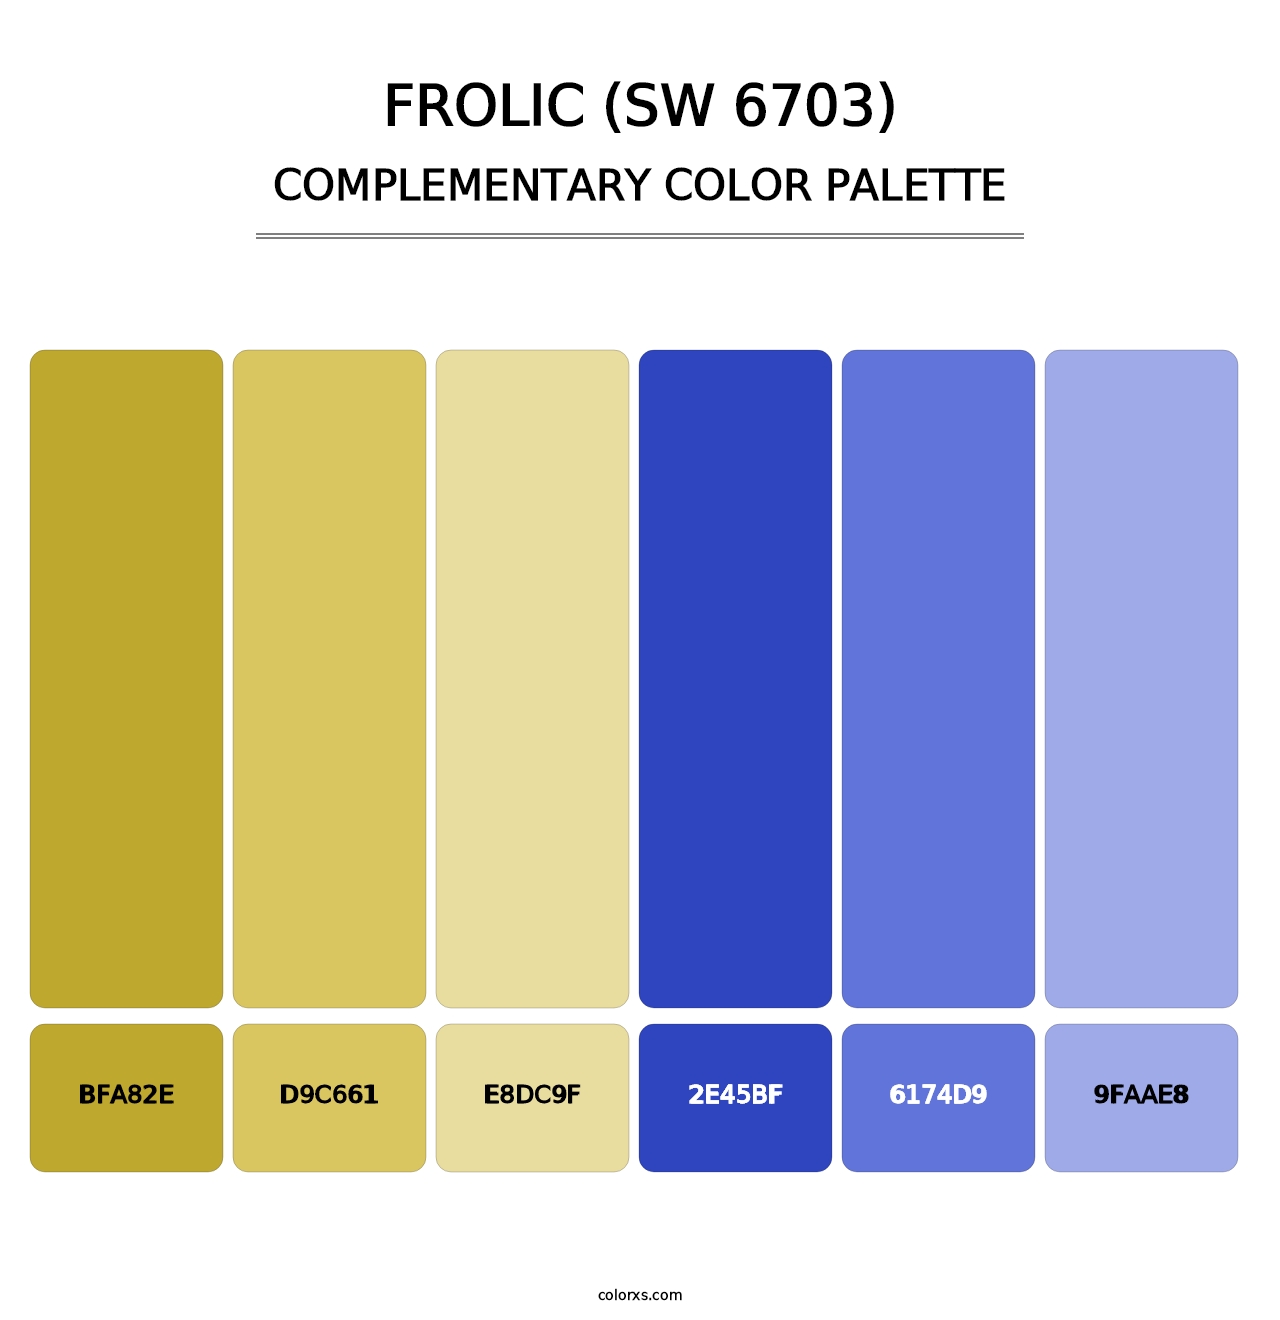 Frolic (SW 6703) - Complementary Color Palette